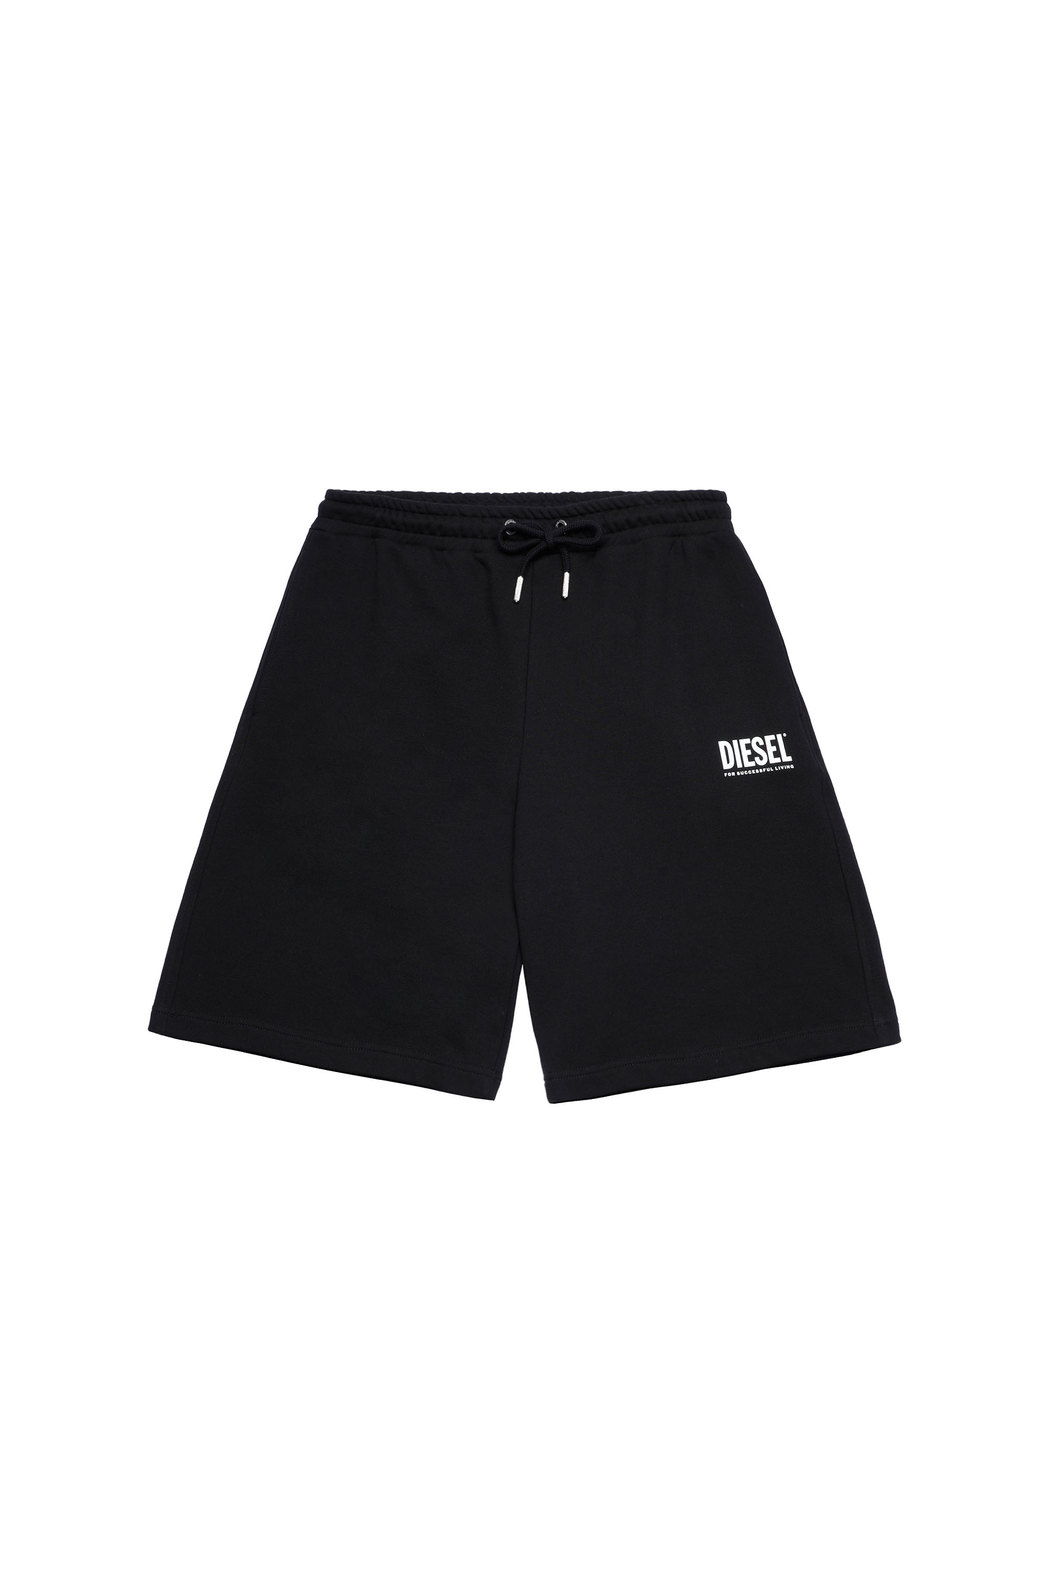 Green Label shorts with logo print